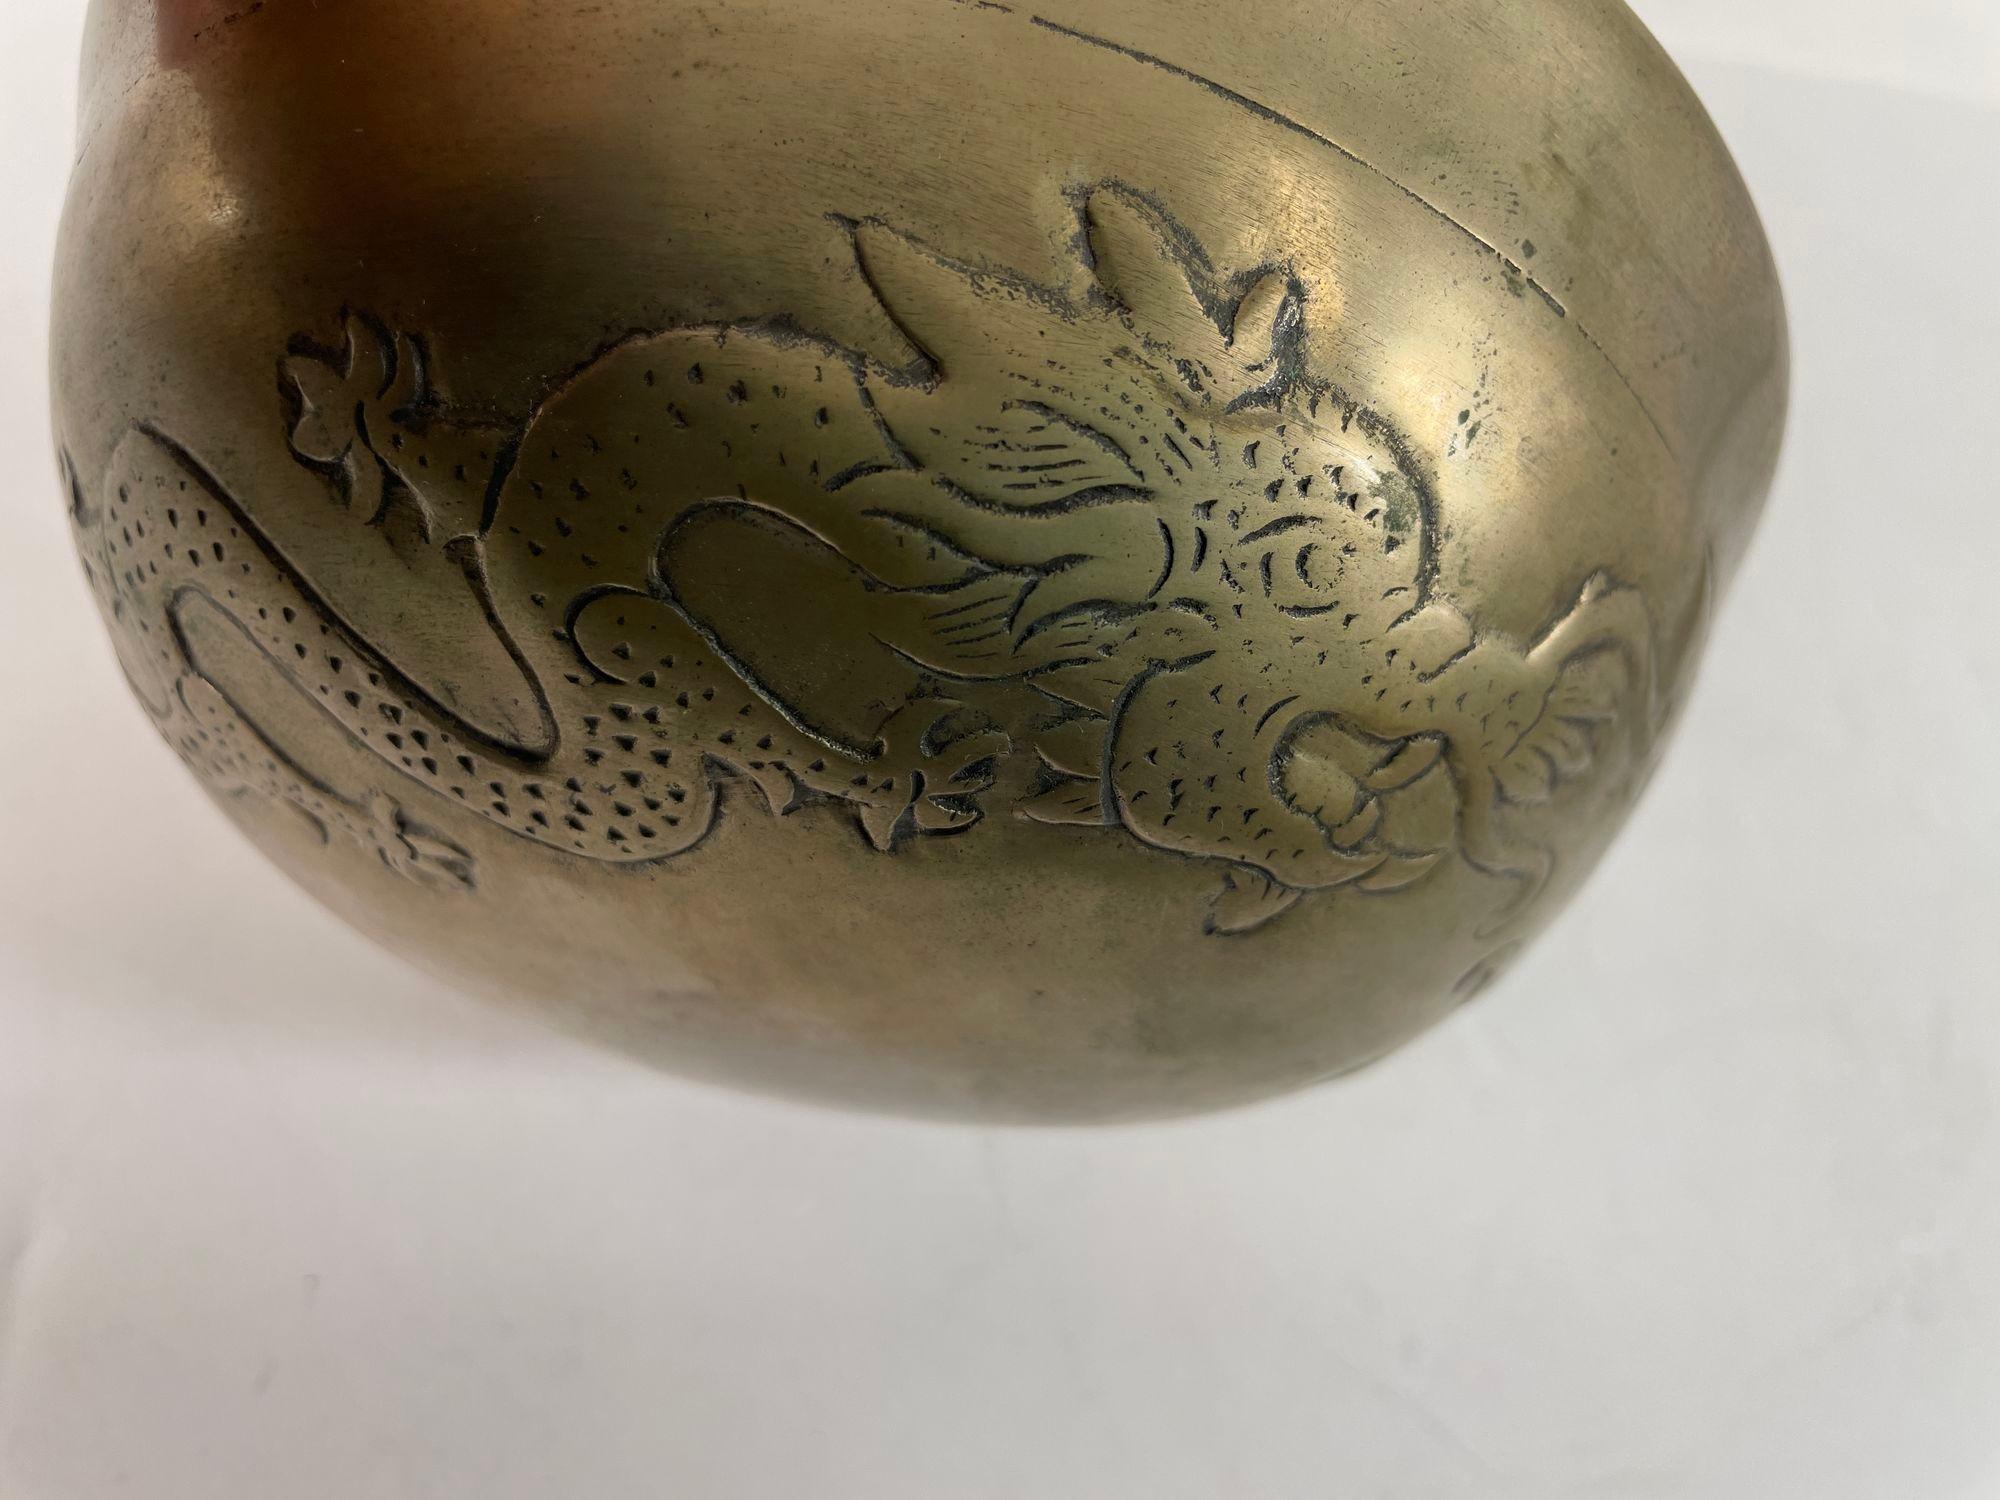 Hammered Brass Singing Bowl with Dragons Nepal 1940s For Sale 5